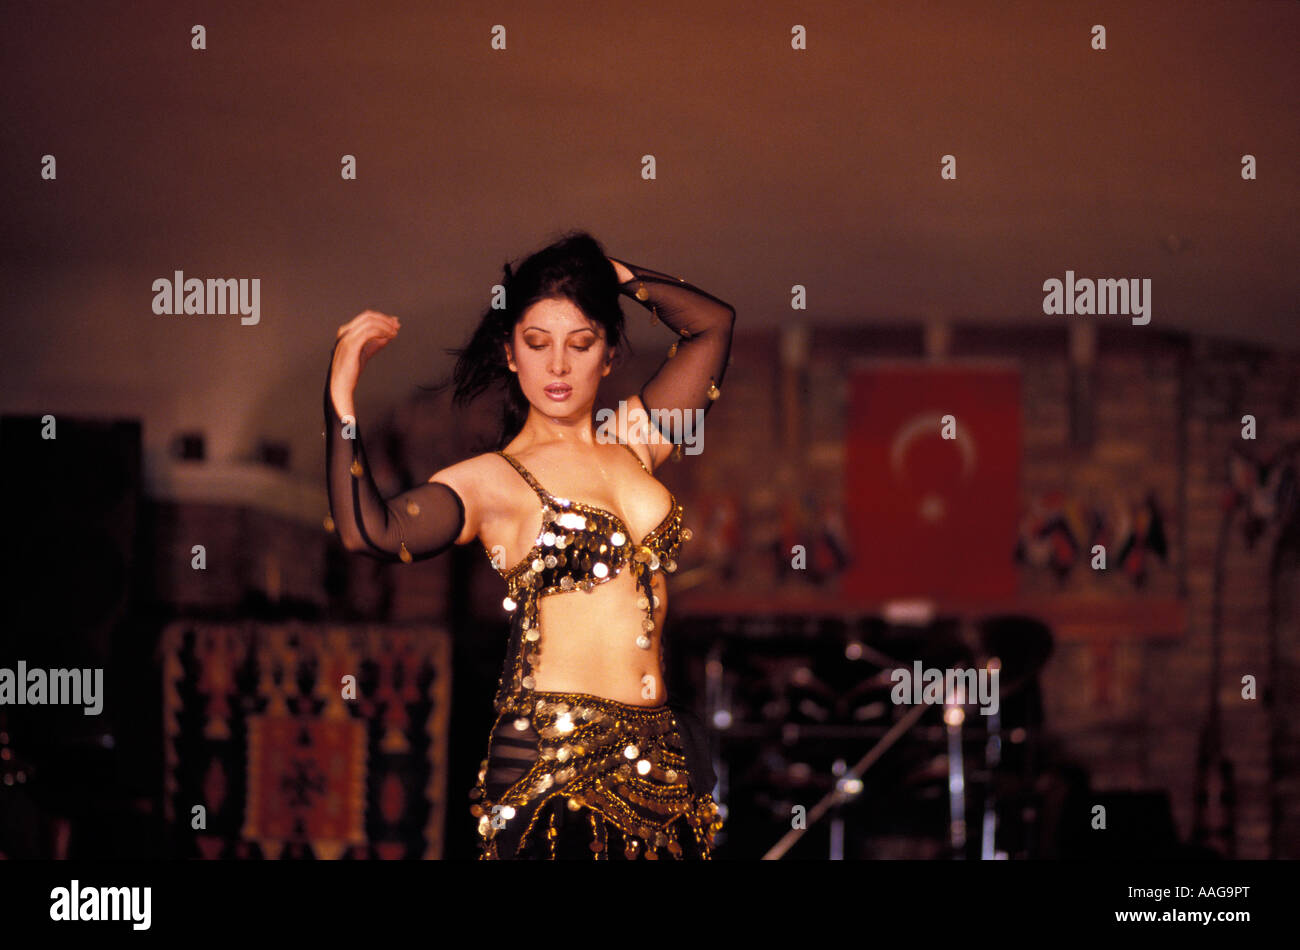 Woman Showing Belly Dance Istanbul Istanbul Turkey Stock Photo Alamy